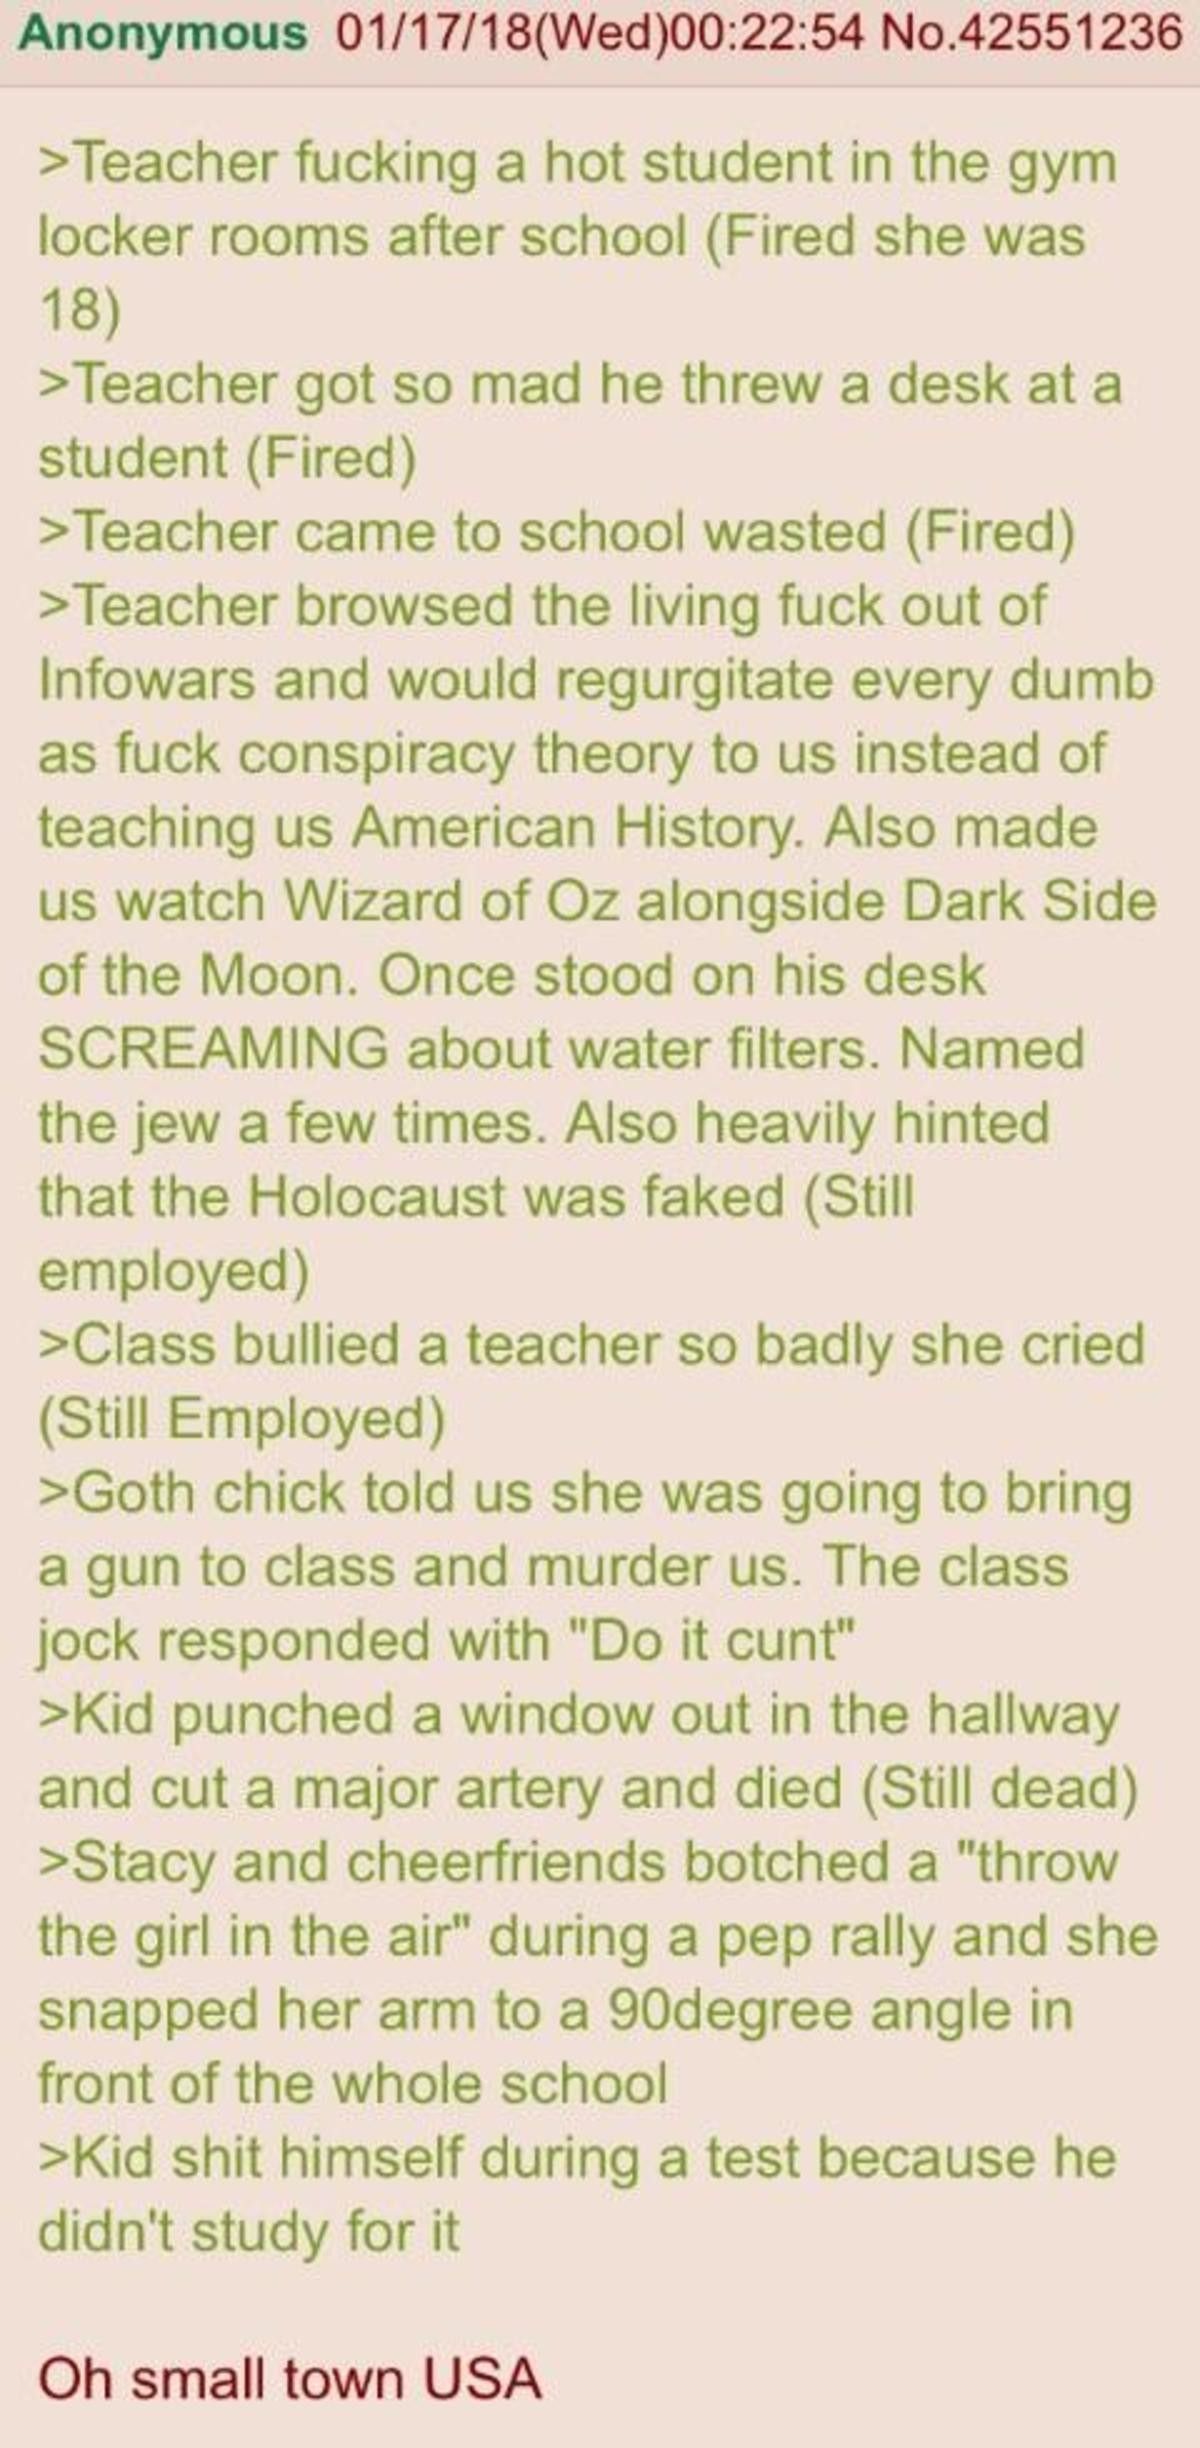 Anon comes from a small town.